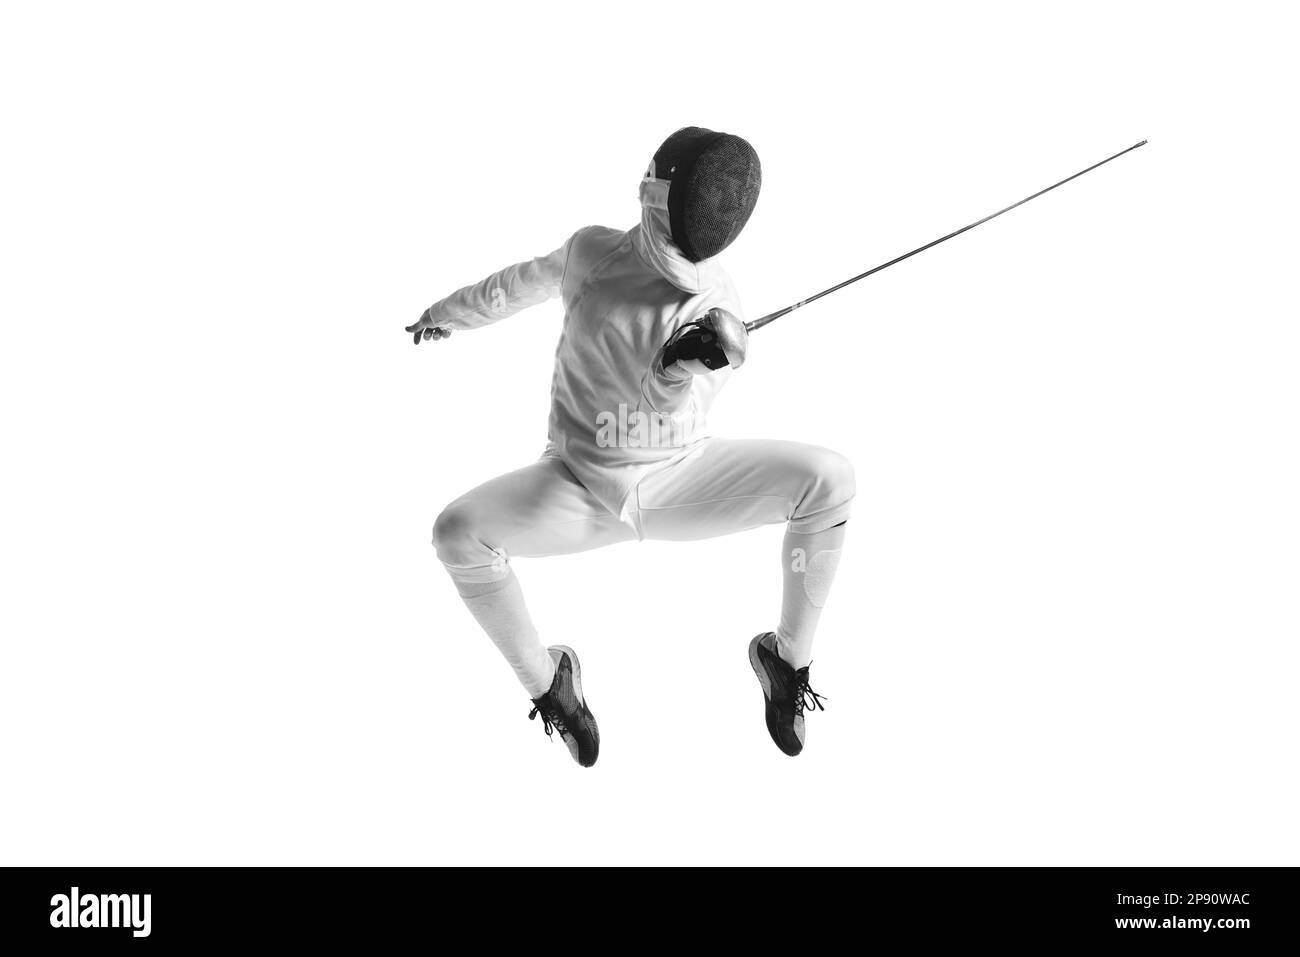 Full-length portrait of sportive man, professional fencer in fencing costume and protective helmet mask in motion isolated on white studio background. Stock Photo